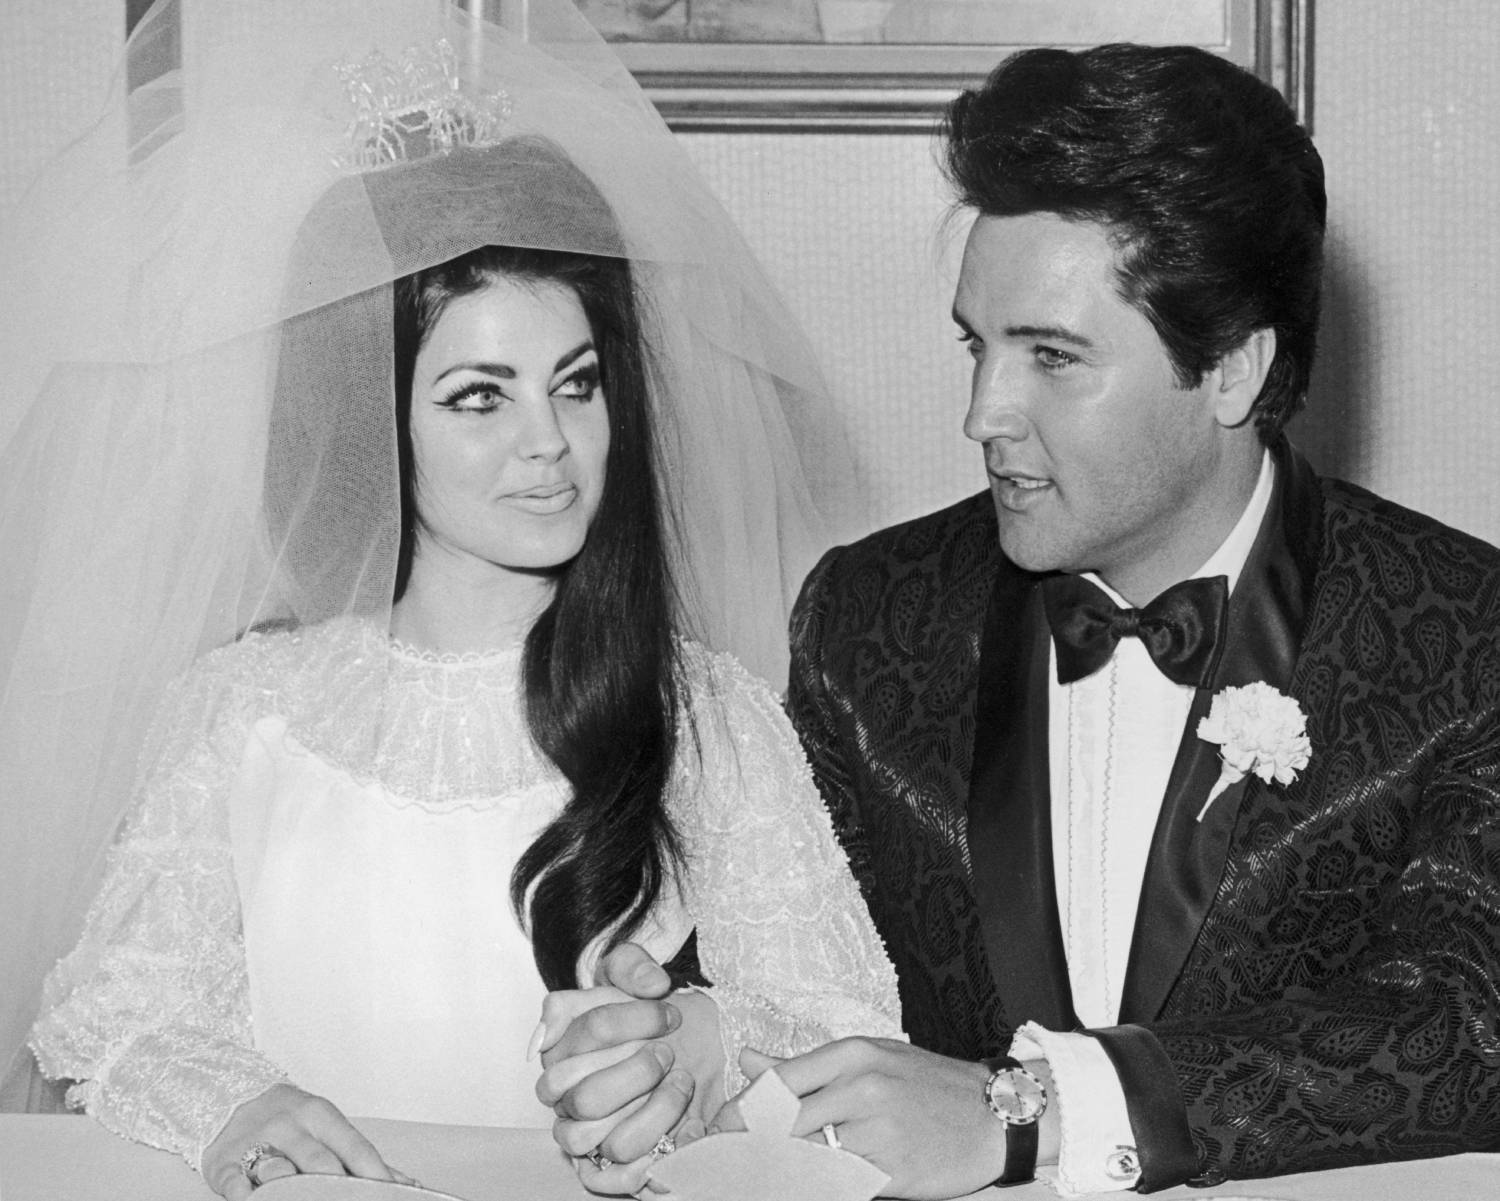 American rock n' roll singer and actor Elvis Presley (1935 - 1977) sits and holds hands with his bride Priscilla Presley on their wedding day, Las Vegas, Nevada. She wears her wedding gown and veil. He wears a carnation in his tuxedo lapel.